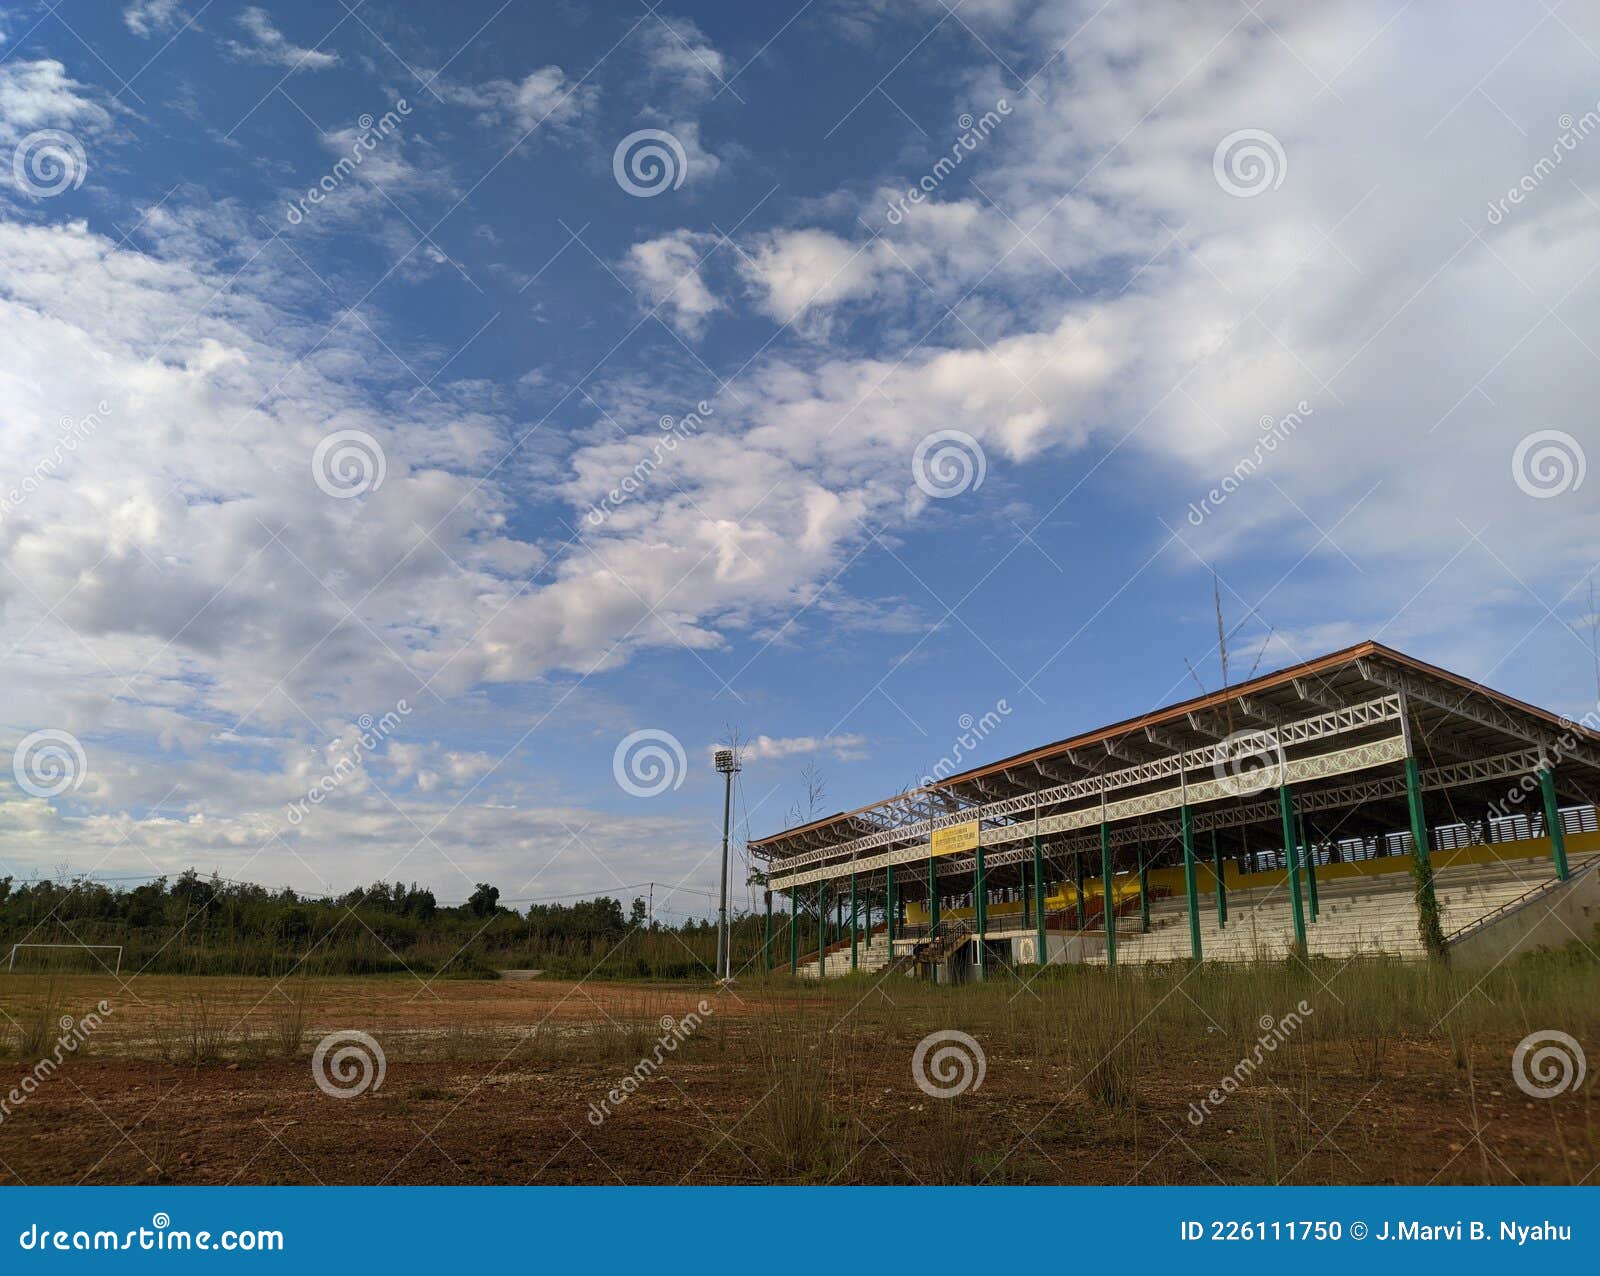 goldenhour photography of local stadion in borneo city